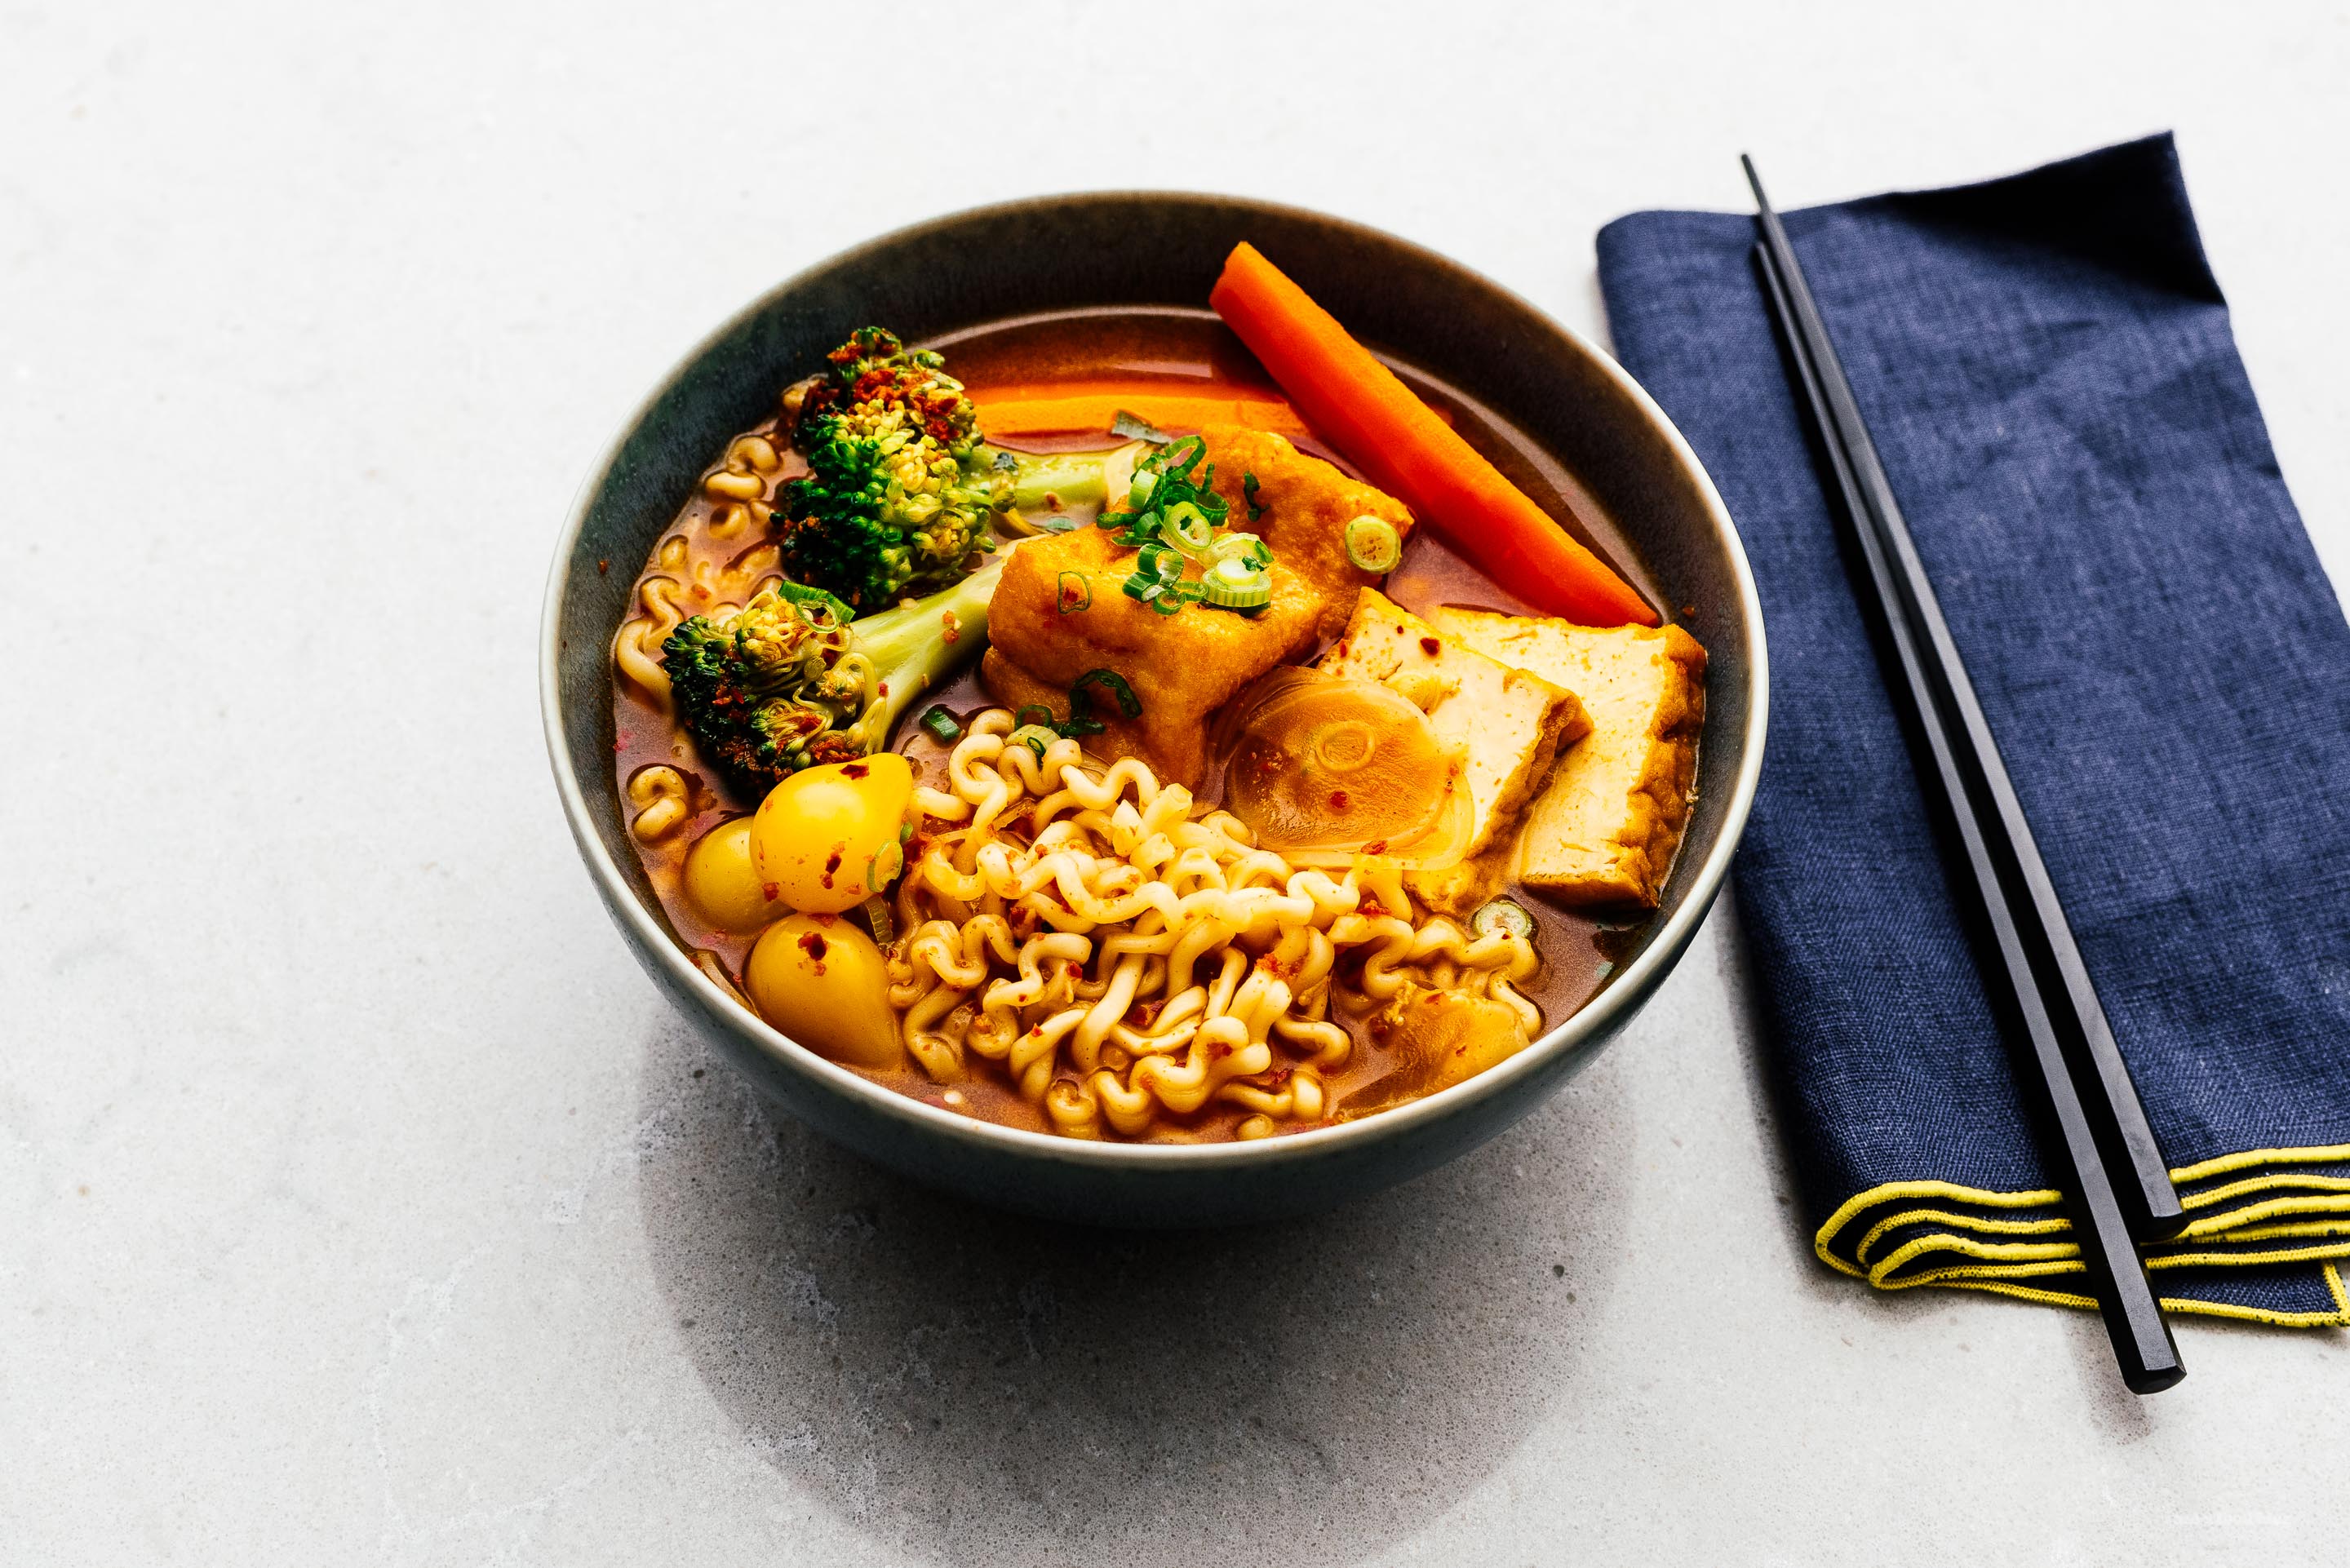 Spicy Korean Ramen Recipe with Tofu and Vegetables